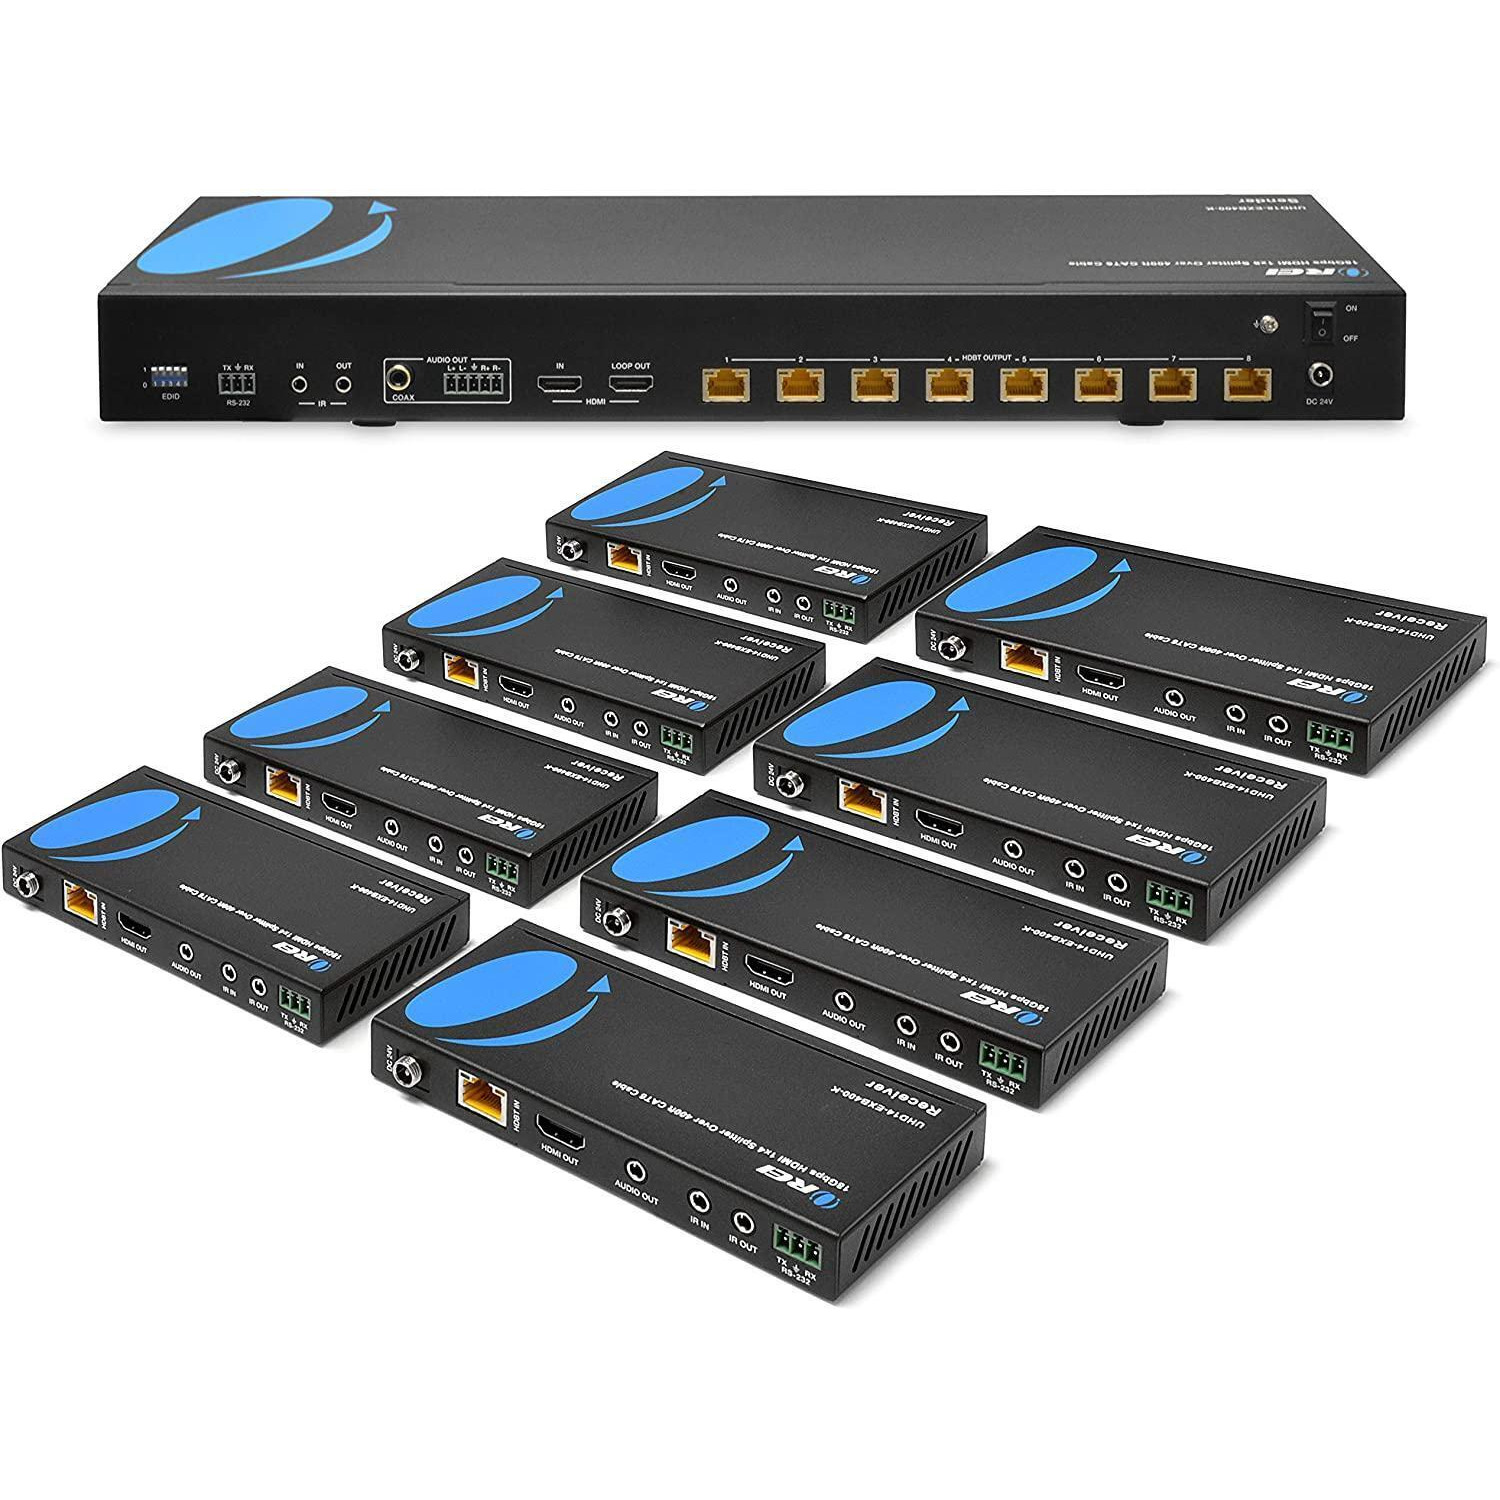 1x8 HDMI Extender Splitter HDBaseT 4K by OREI Multiple Over Single Cable CAT6/7 4K@60Hz 4:4:4 HDCP 2.2 with IR Remote EDID Management, HDR - Up to 400 Ft - Loop Out - Low Latency - Full Support